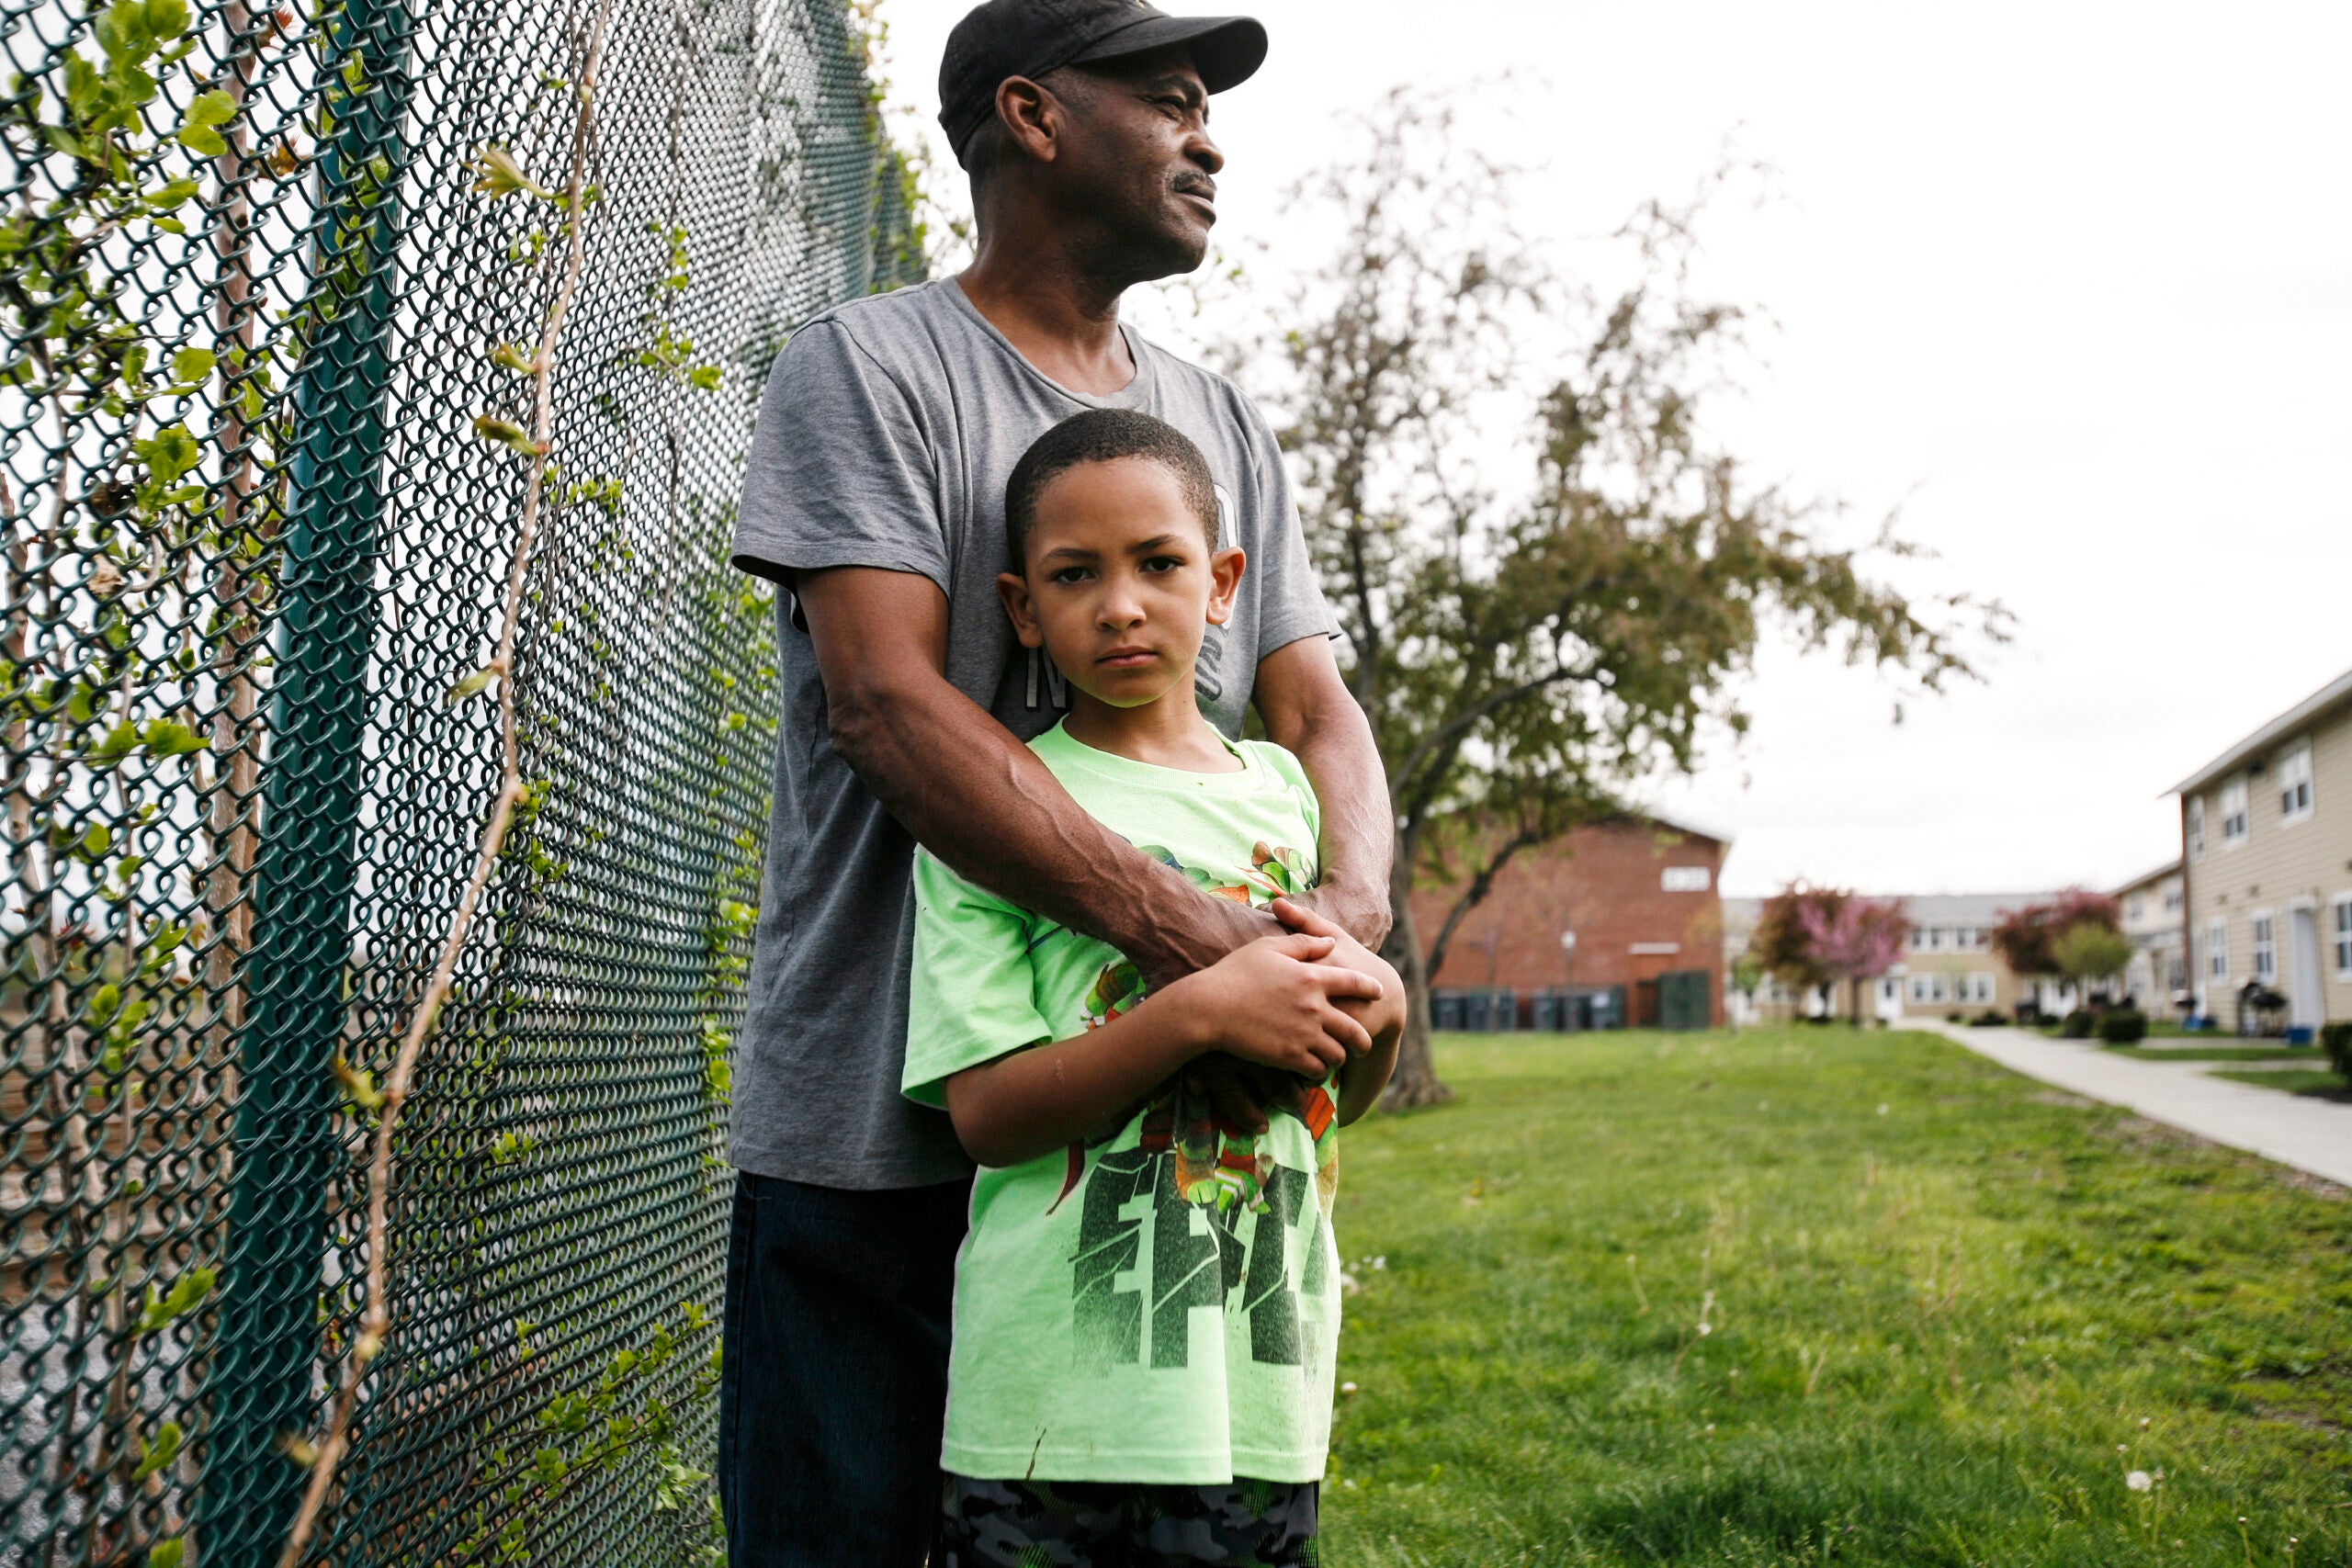 An activist and resident of Albany's South End, Bebe White says his son is scared of the loud noises made by trains carrying oil to the port just yards from their home.
(Photo by Earthjustice)